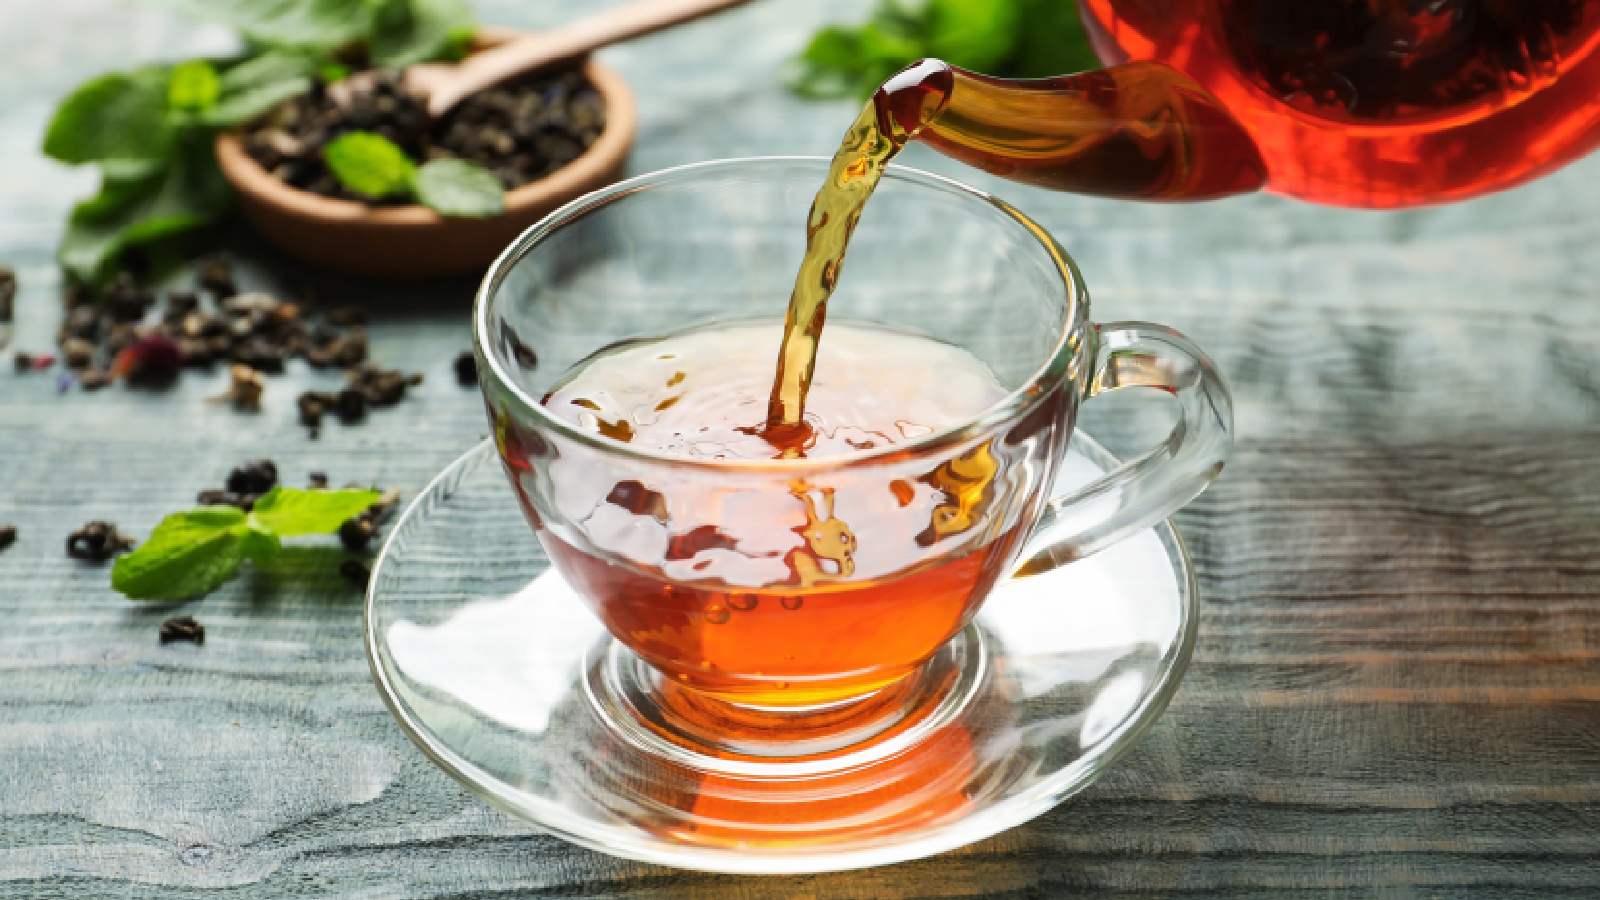 Herbal tea is beneficial to the skin.